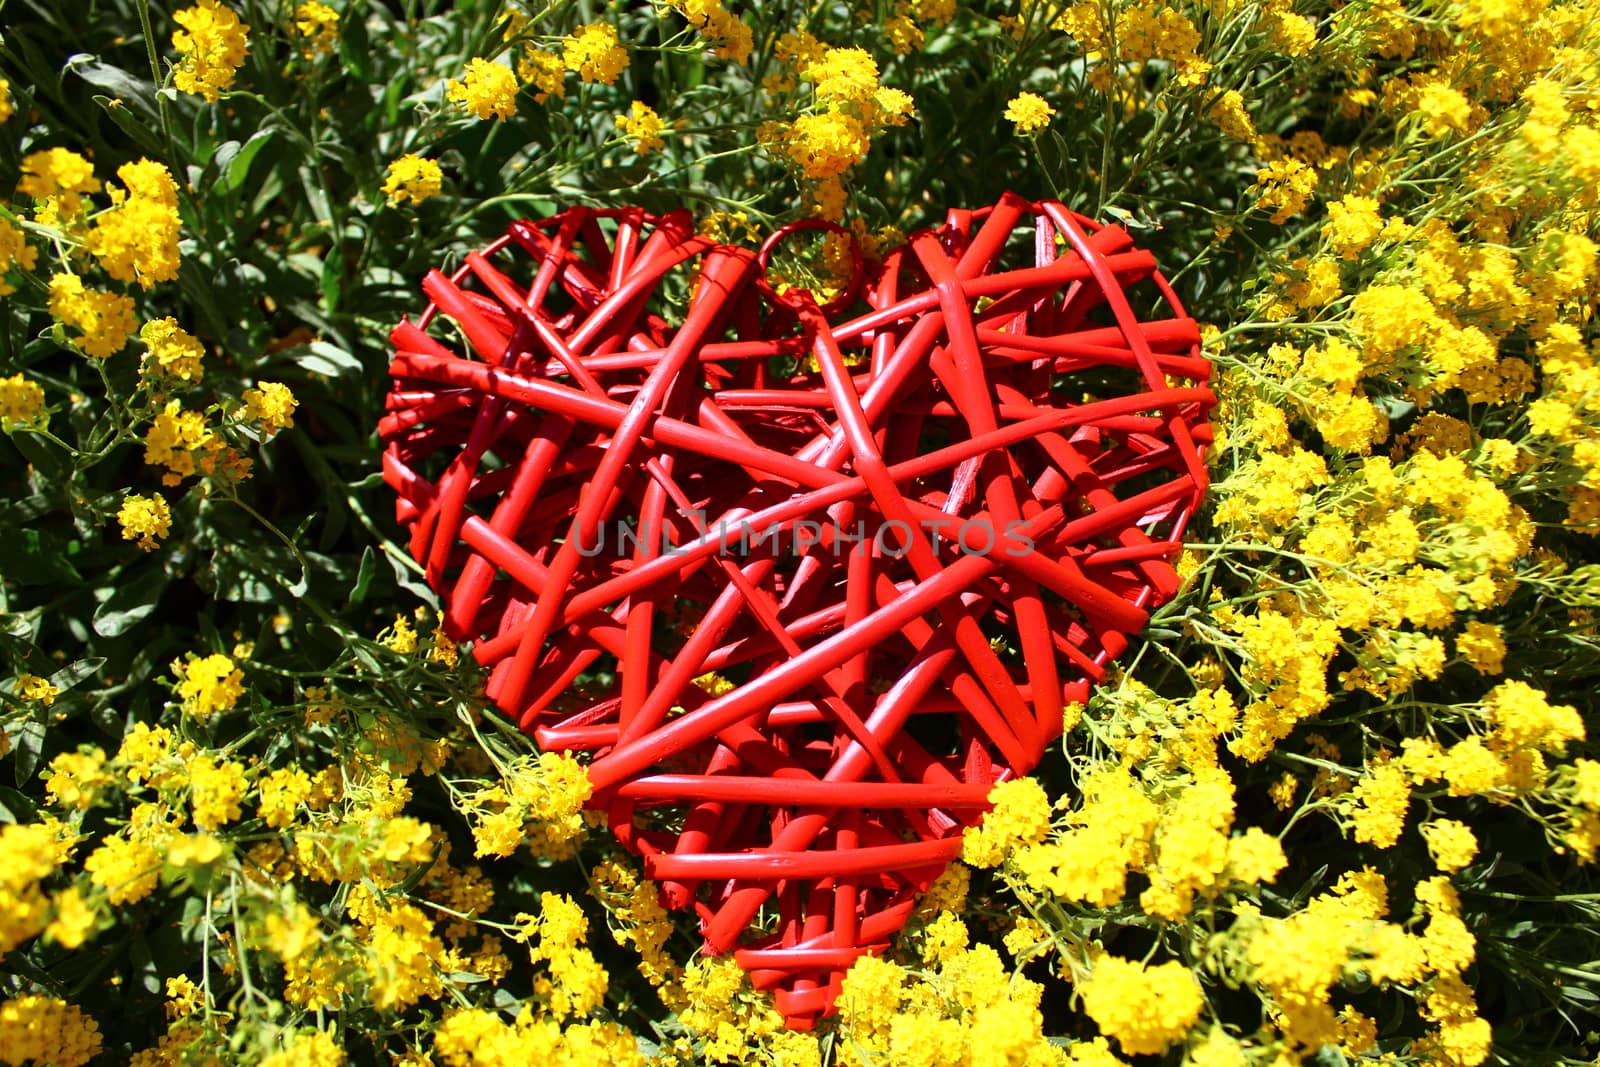 red heart and spring flowers by martina_unbehauen